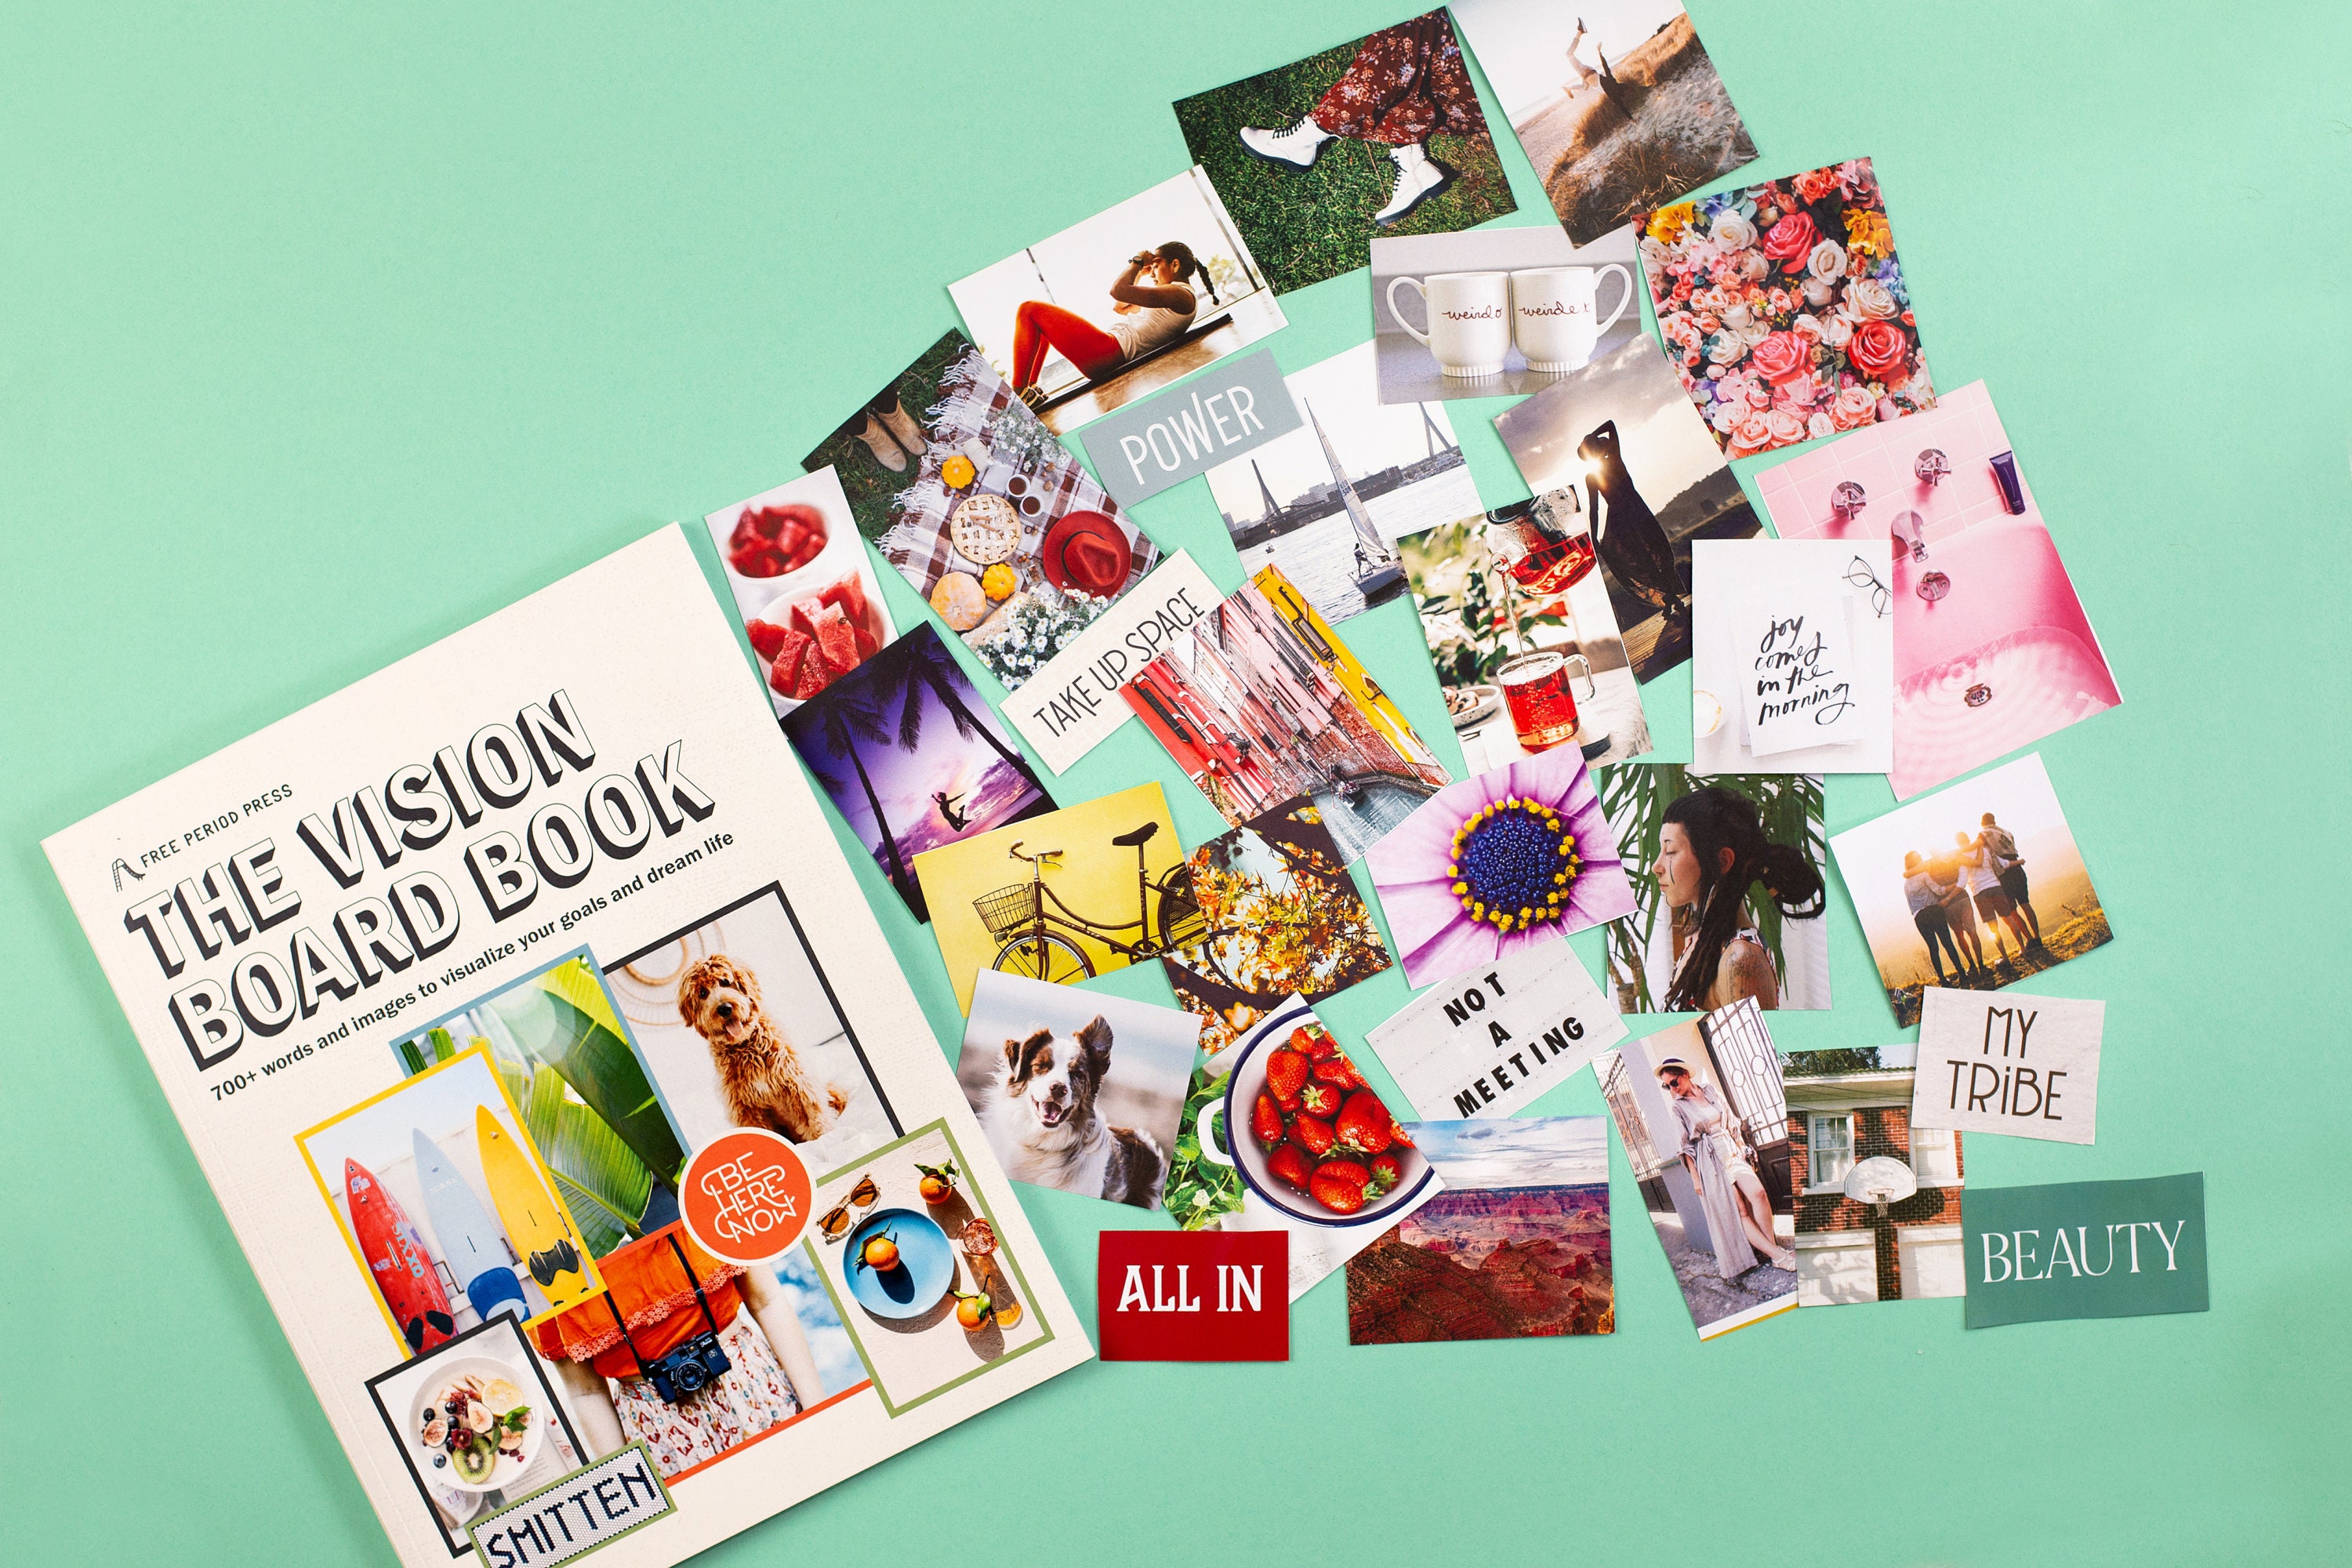 The Vision Board Book: 700+ words and images to visualize your goals a –  Free Period Press